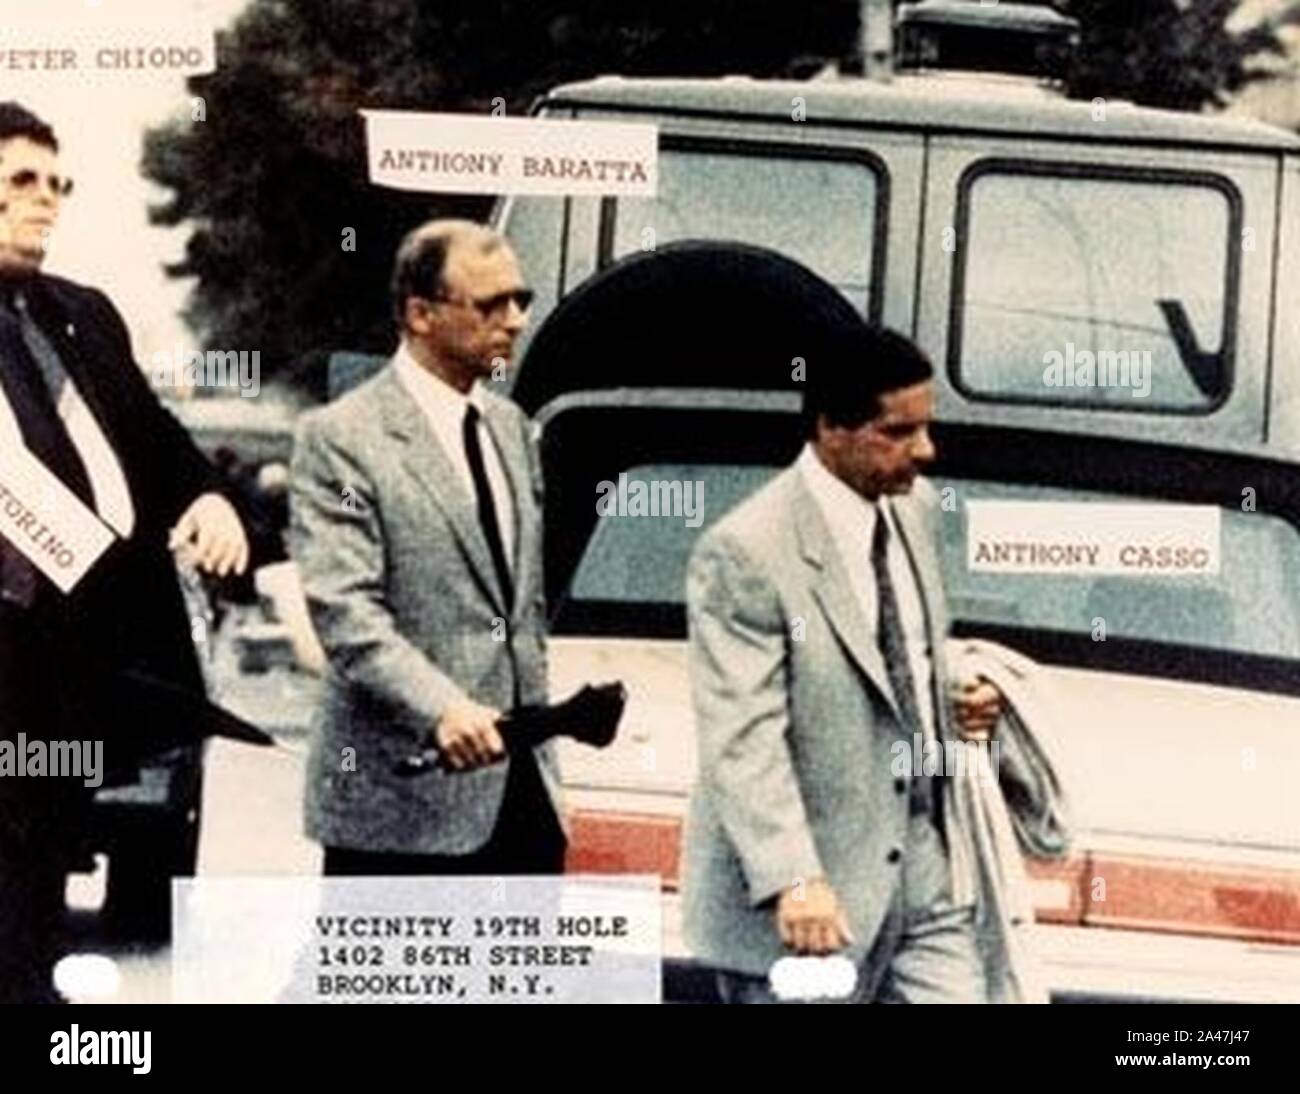 FBI Anthony Casso Anthony Baratta et Peter Chiodo de Lucchese crime famille. Banque D'Images